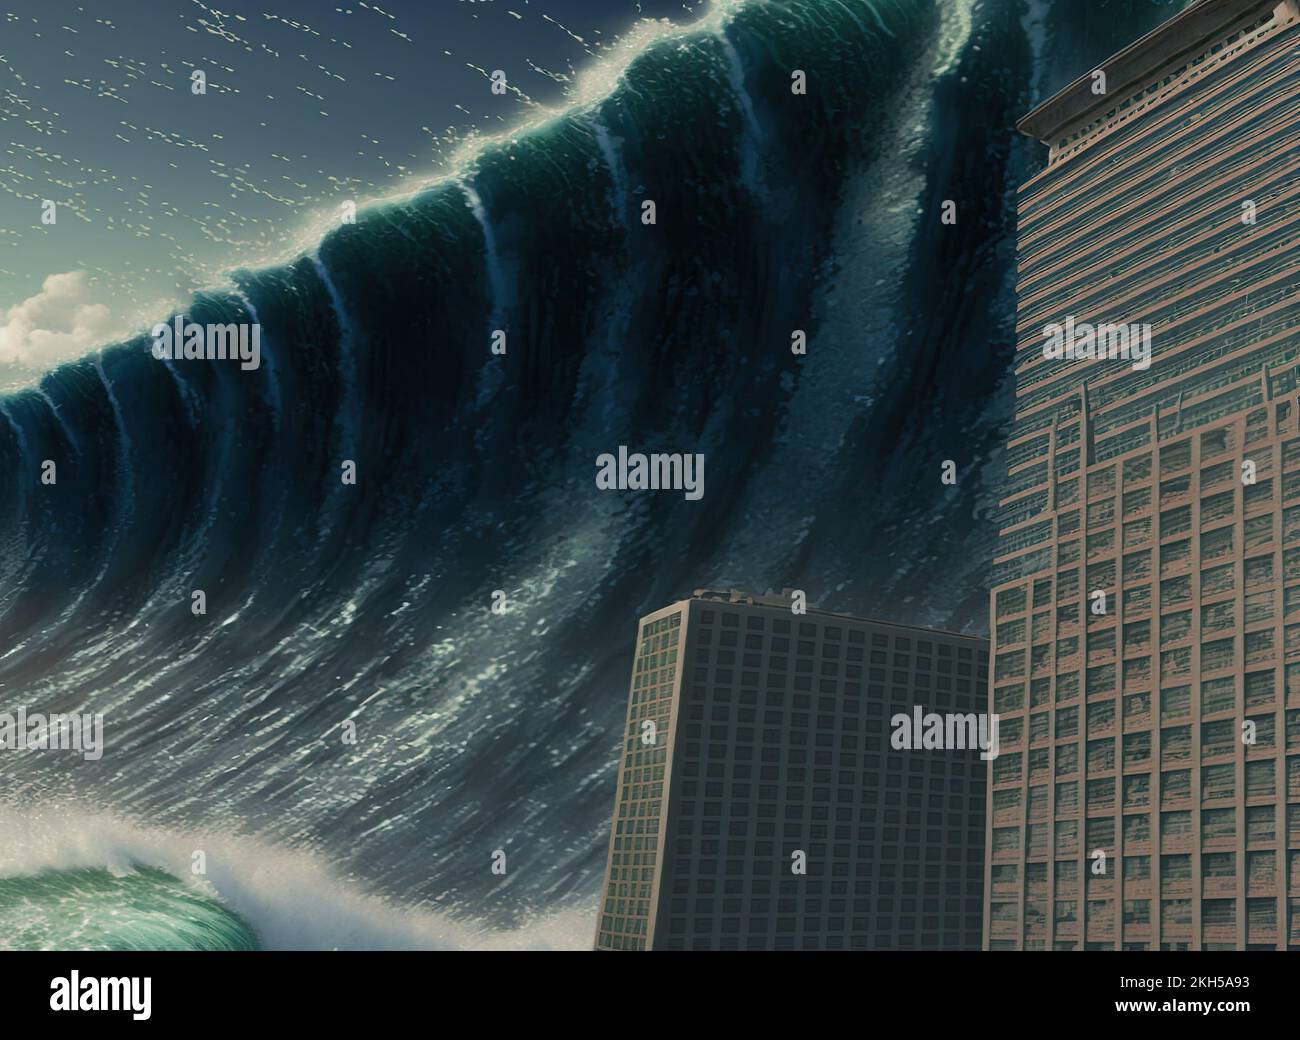 massive mega-tsunami with 100 feet waves hitting a tropical beach of a city by the ocean. Climate change has caused many natural disasters and Stock Photo